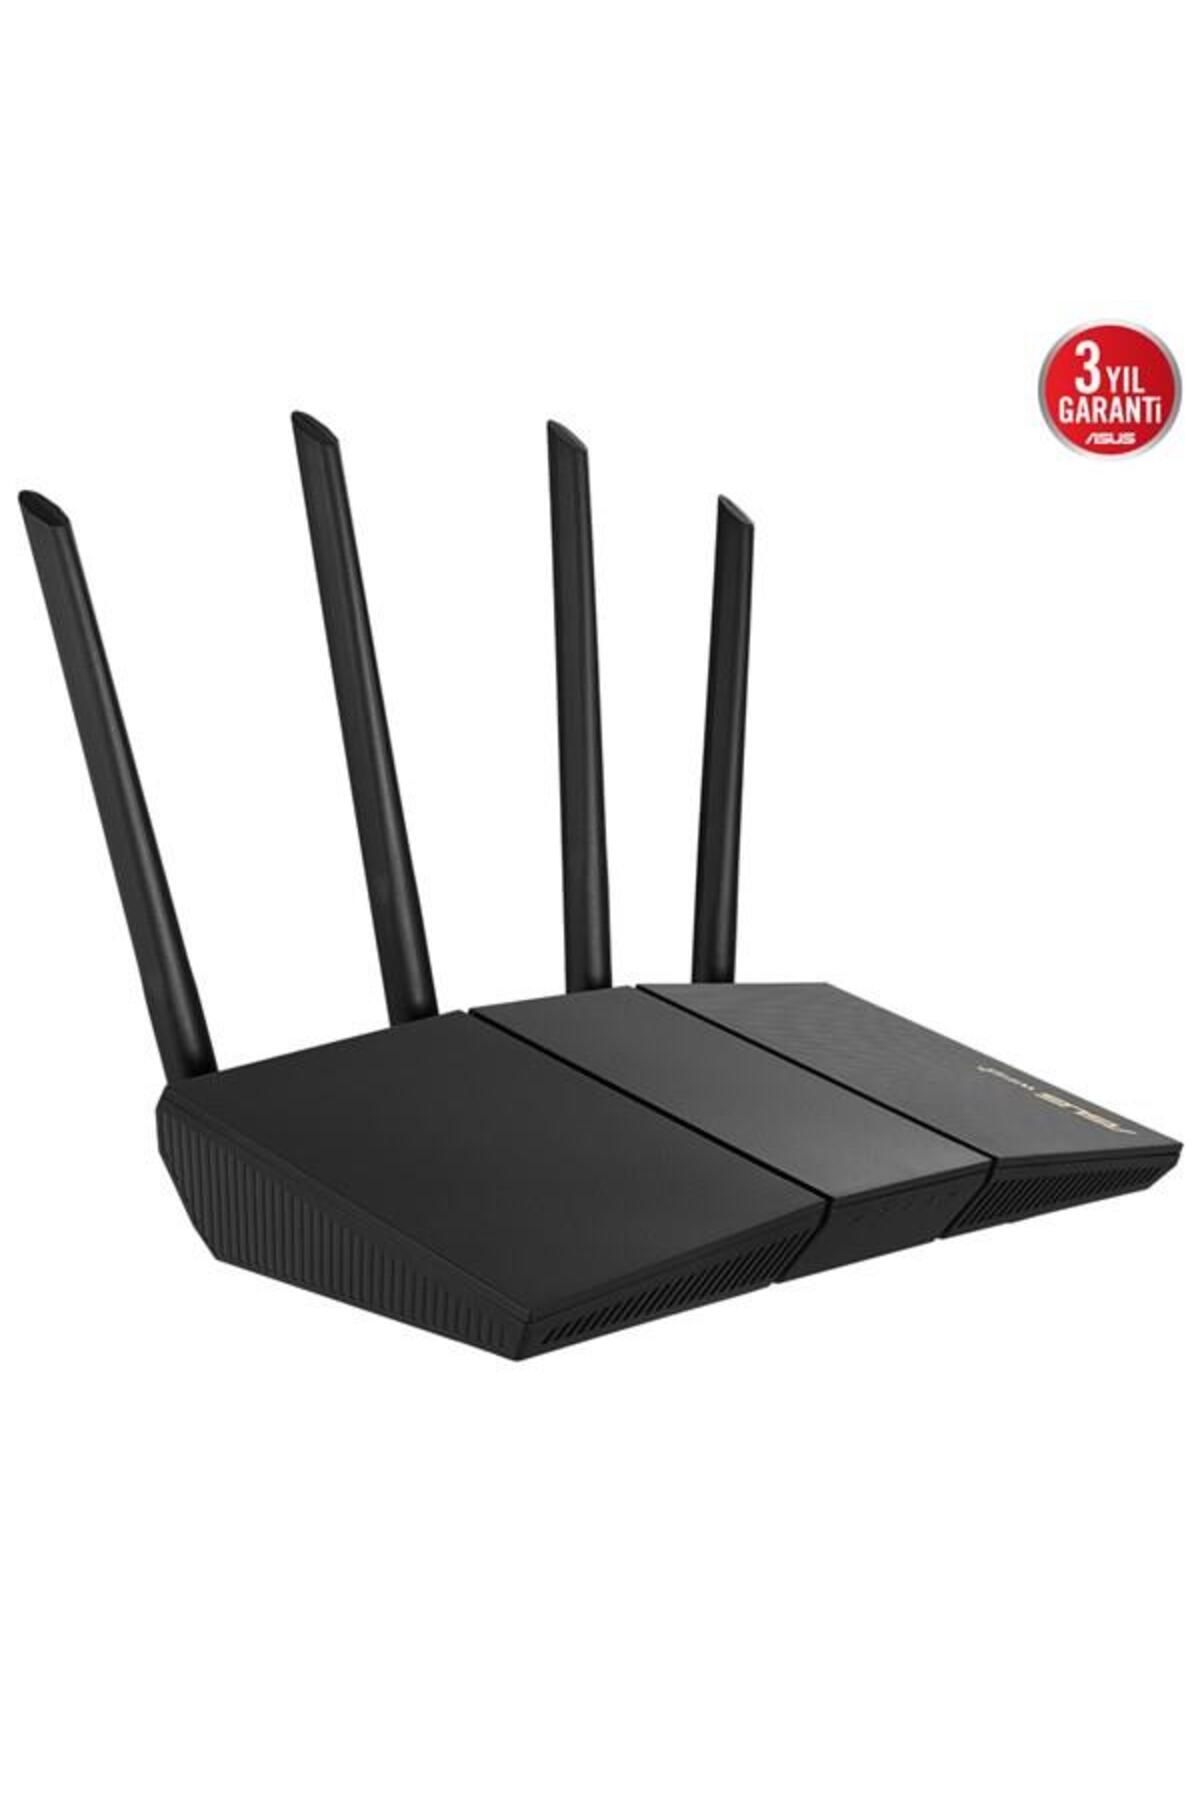 ASUS Rt-ax57 Ax3000 Dual Band Gamıng Router